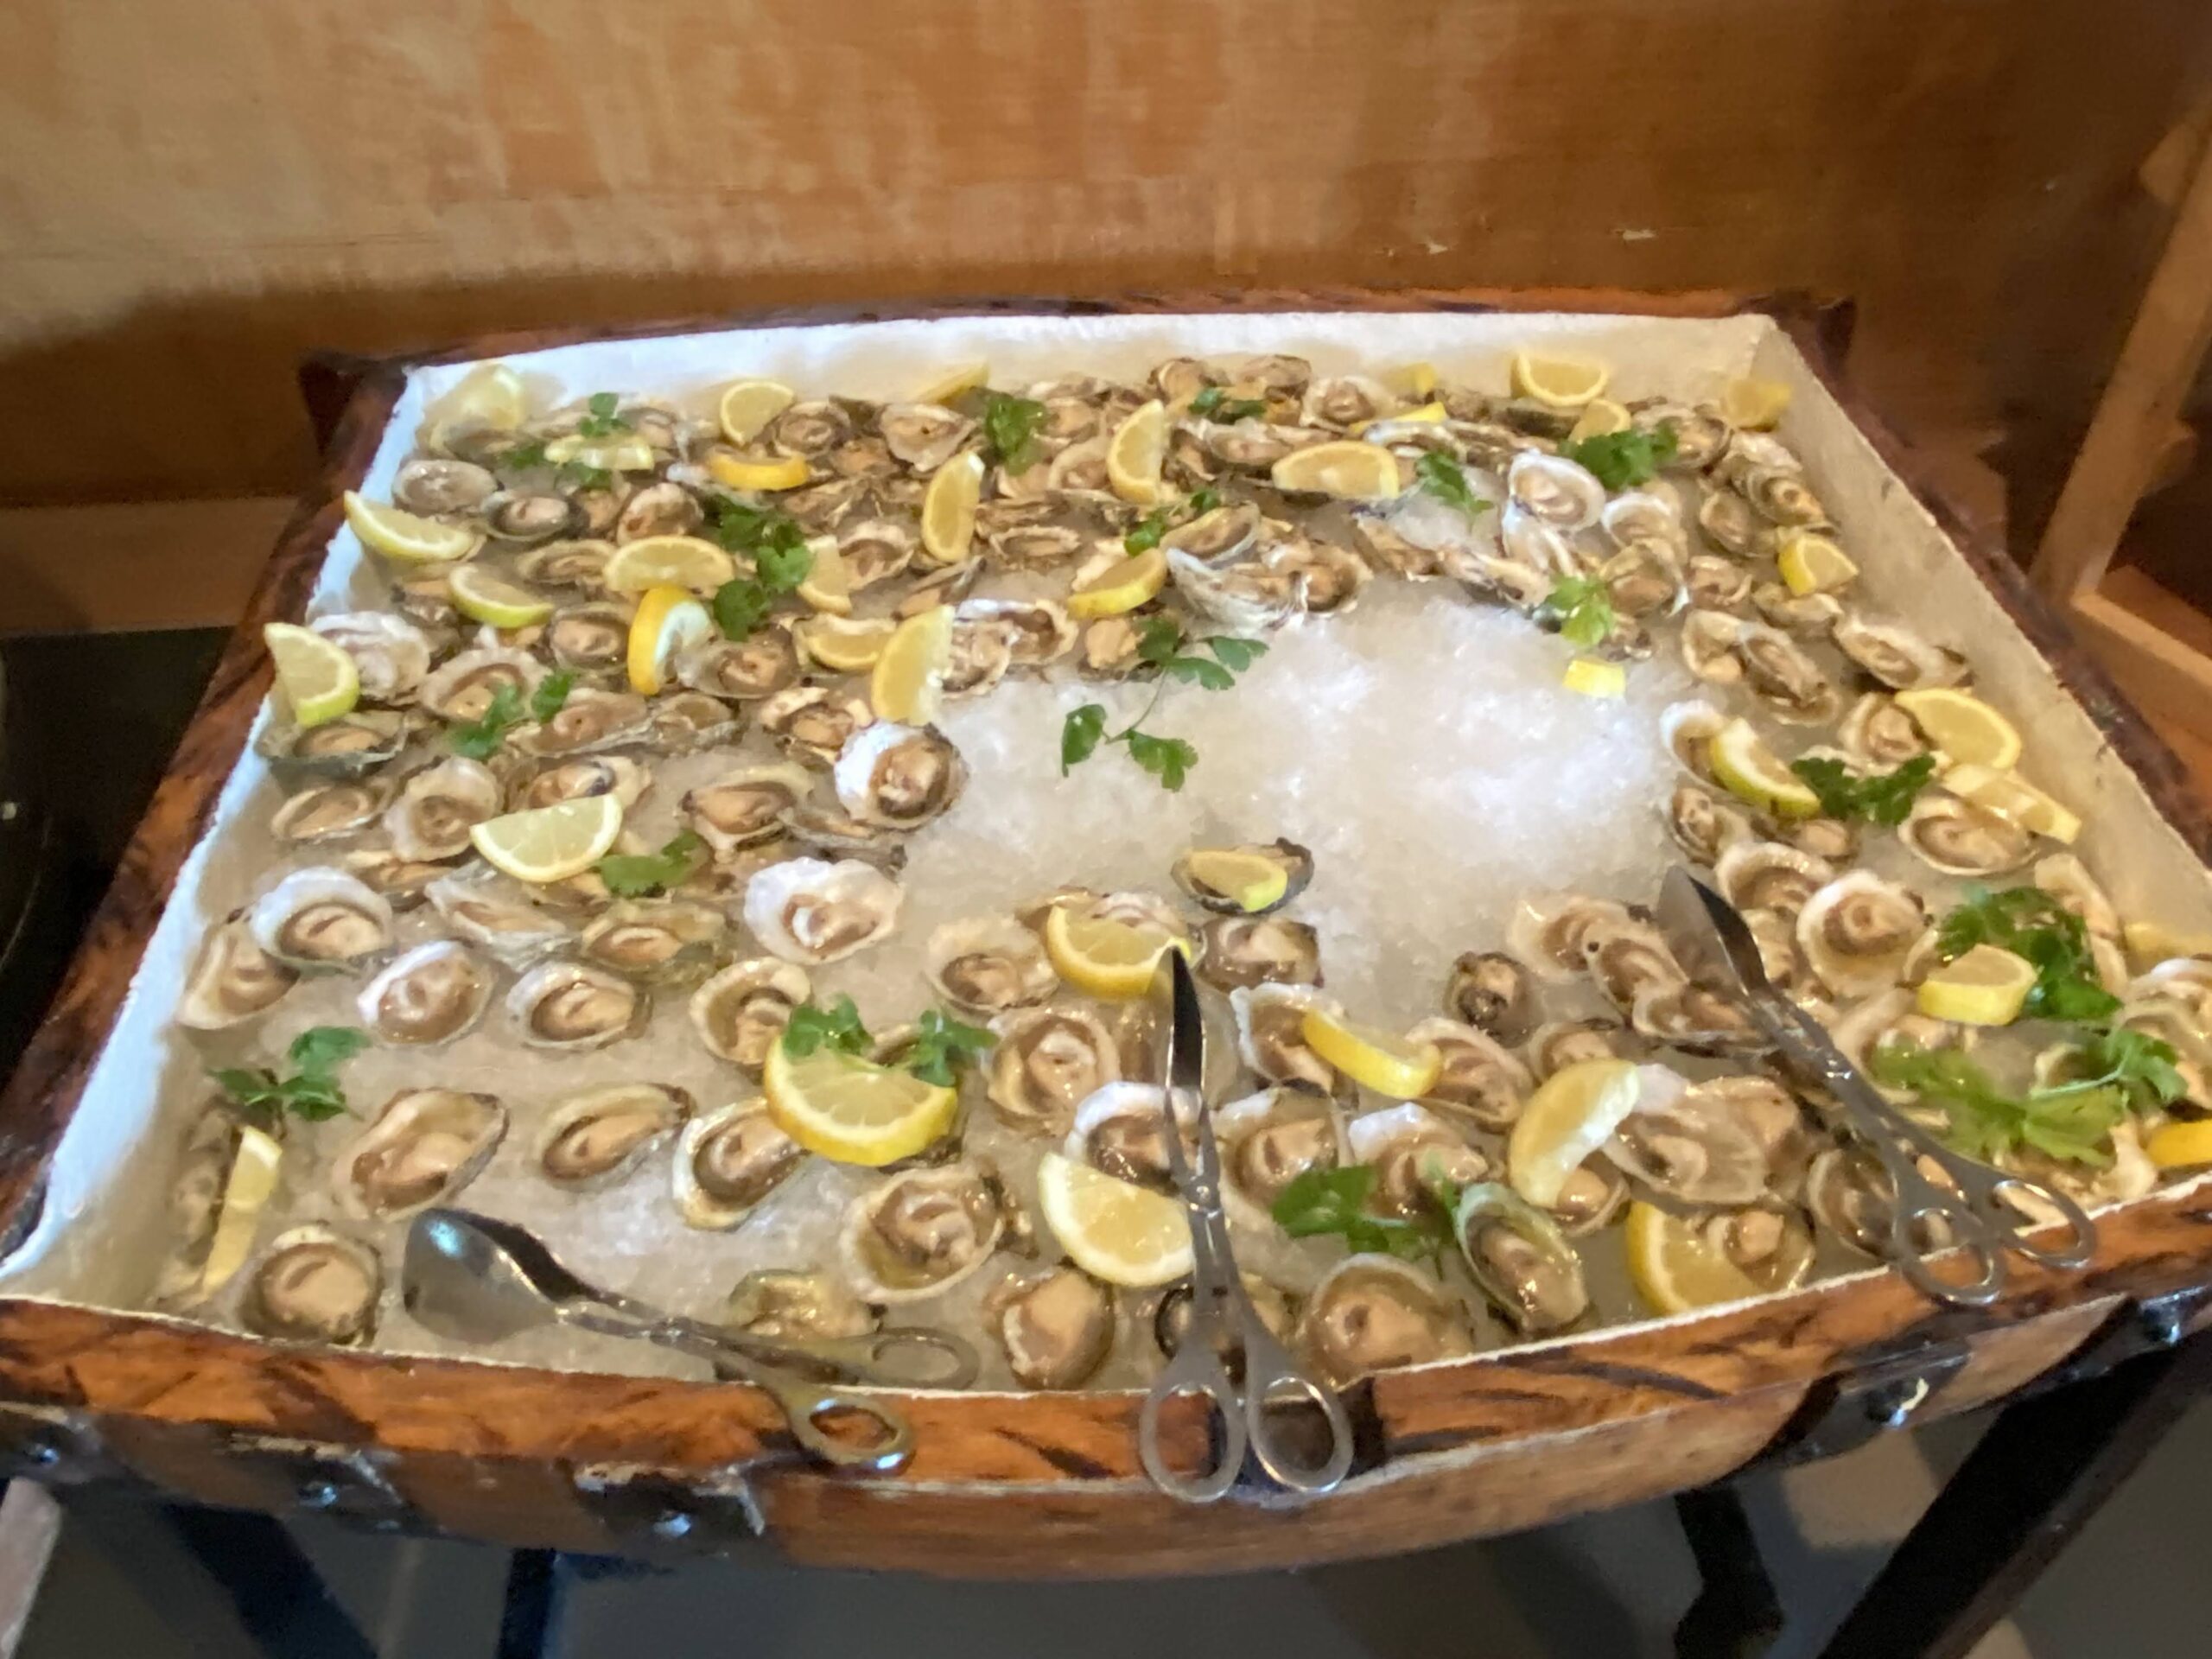 a tray of oysters with lemon slices and ice